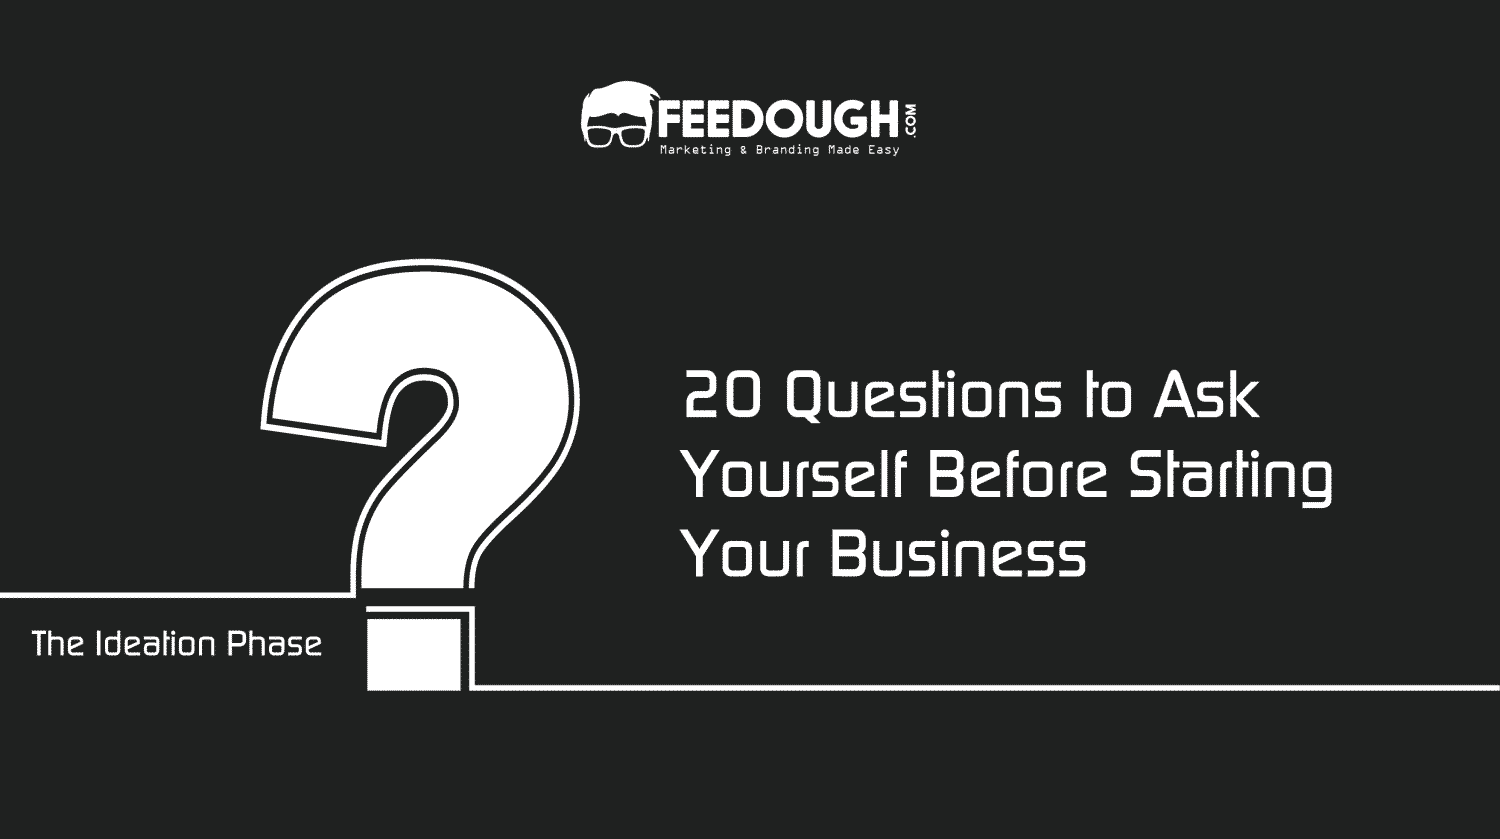 20 Questions to Ask Yourself Before Starting Your Business